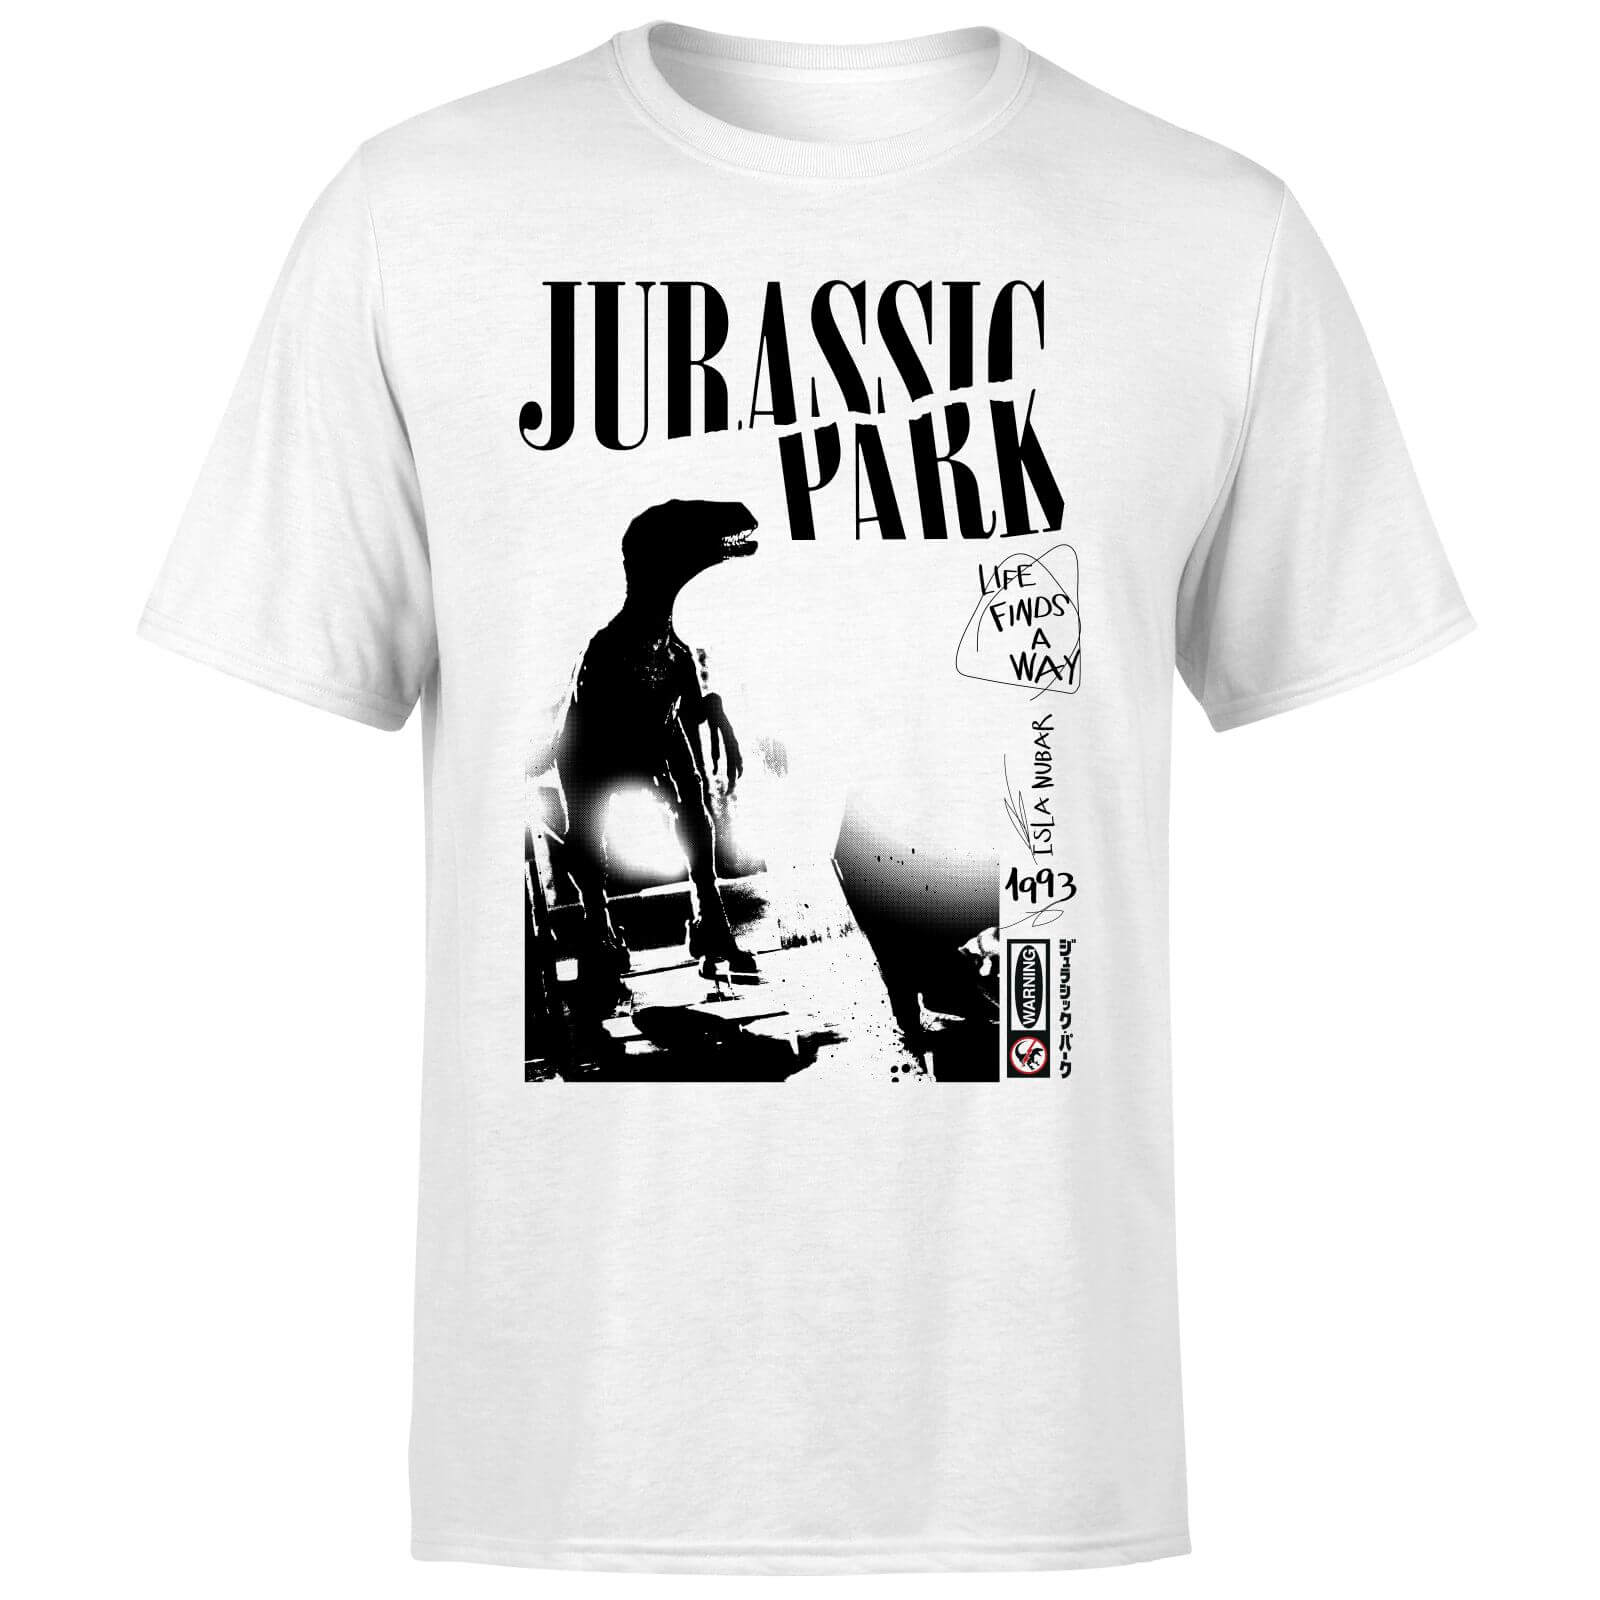 View the best prices for: jurassic park isla nublar punk mens t-shirt